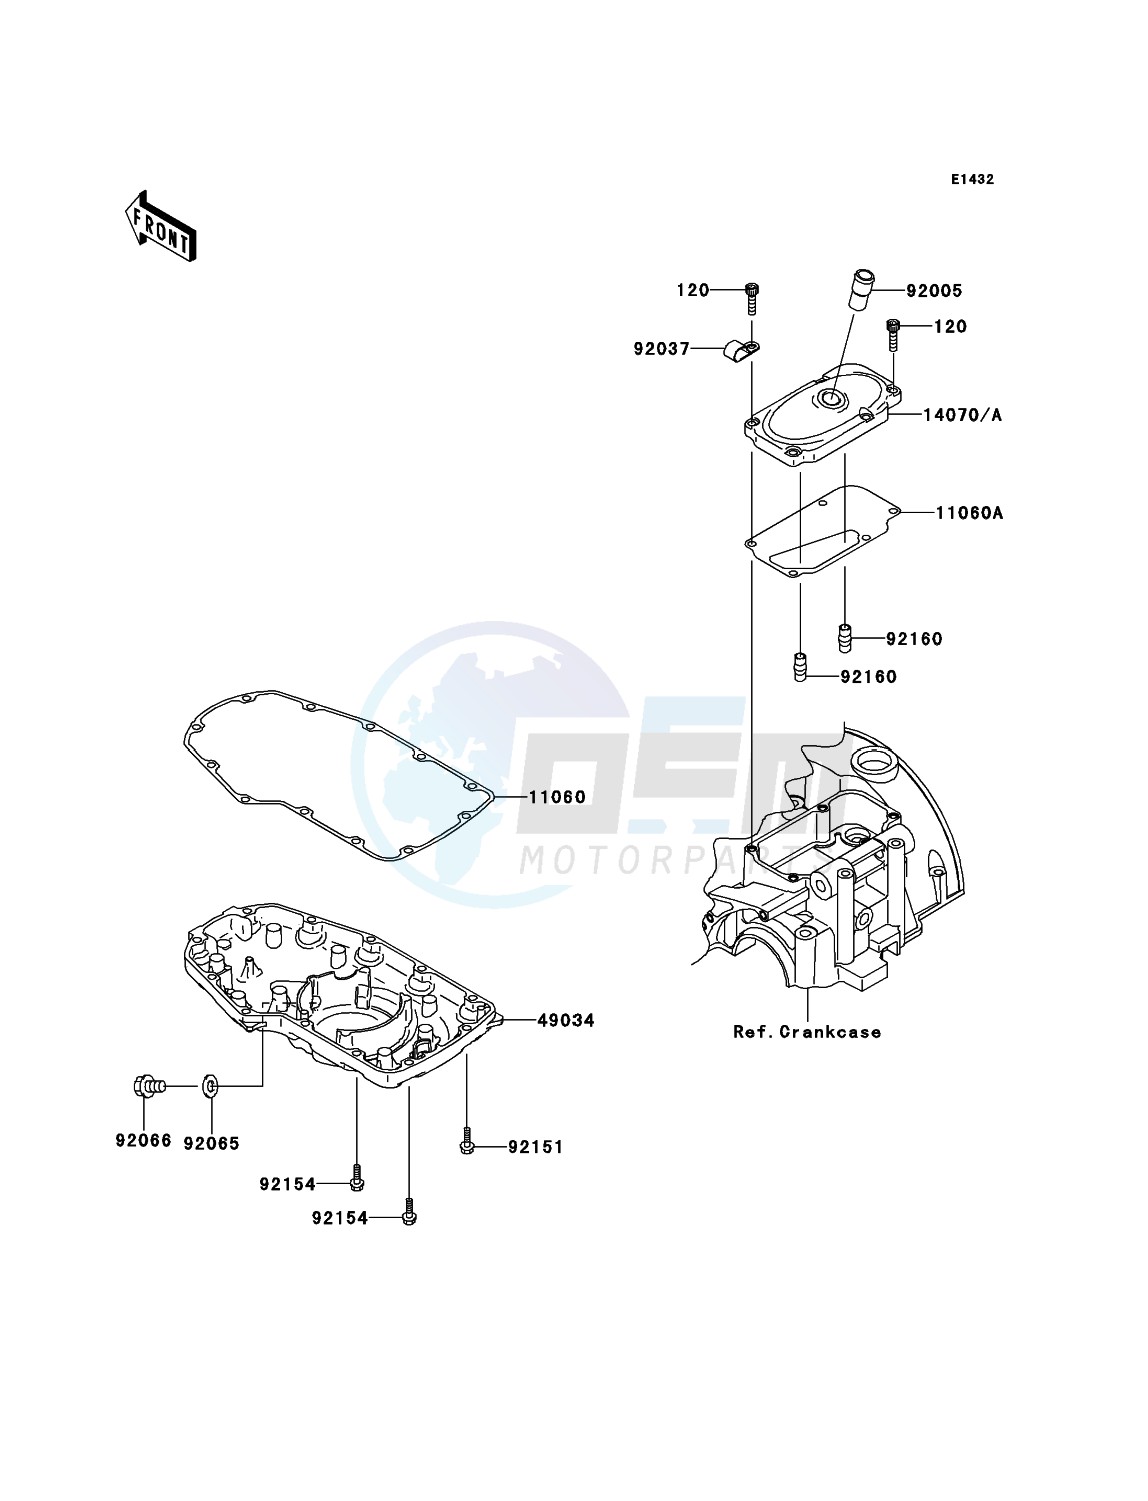 Breather Cover/Oil Pan blueprint